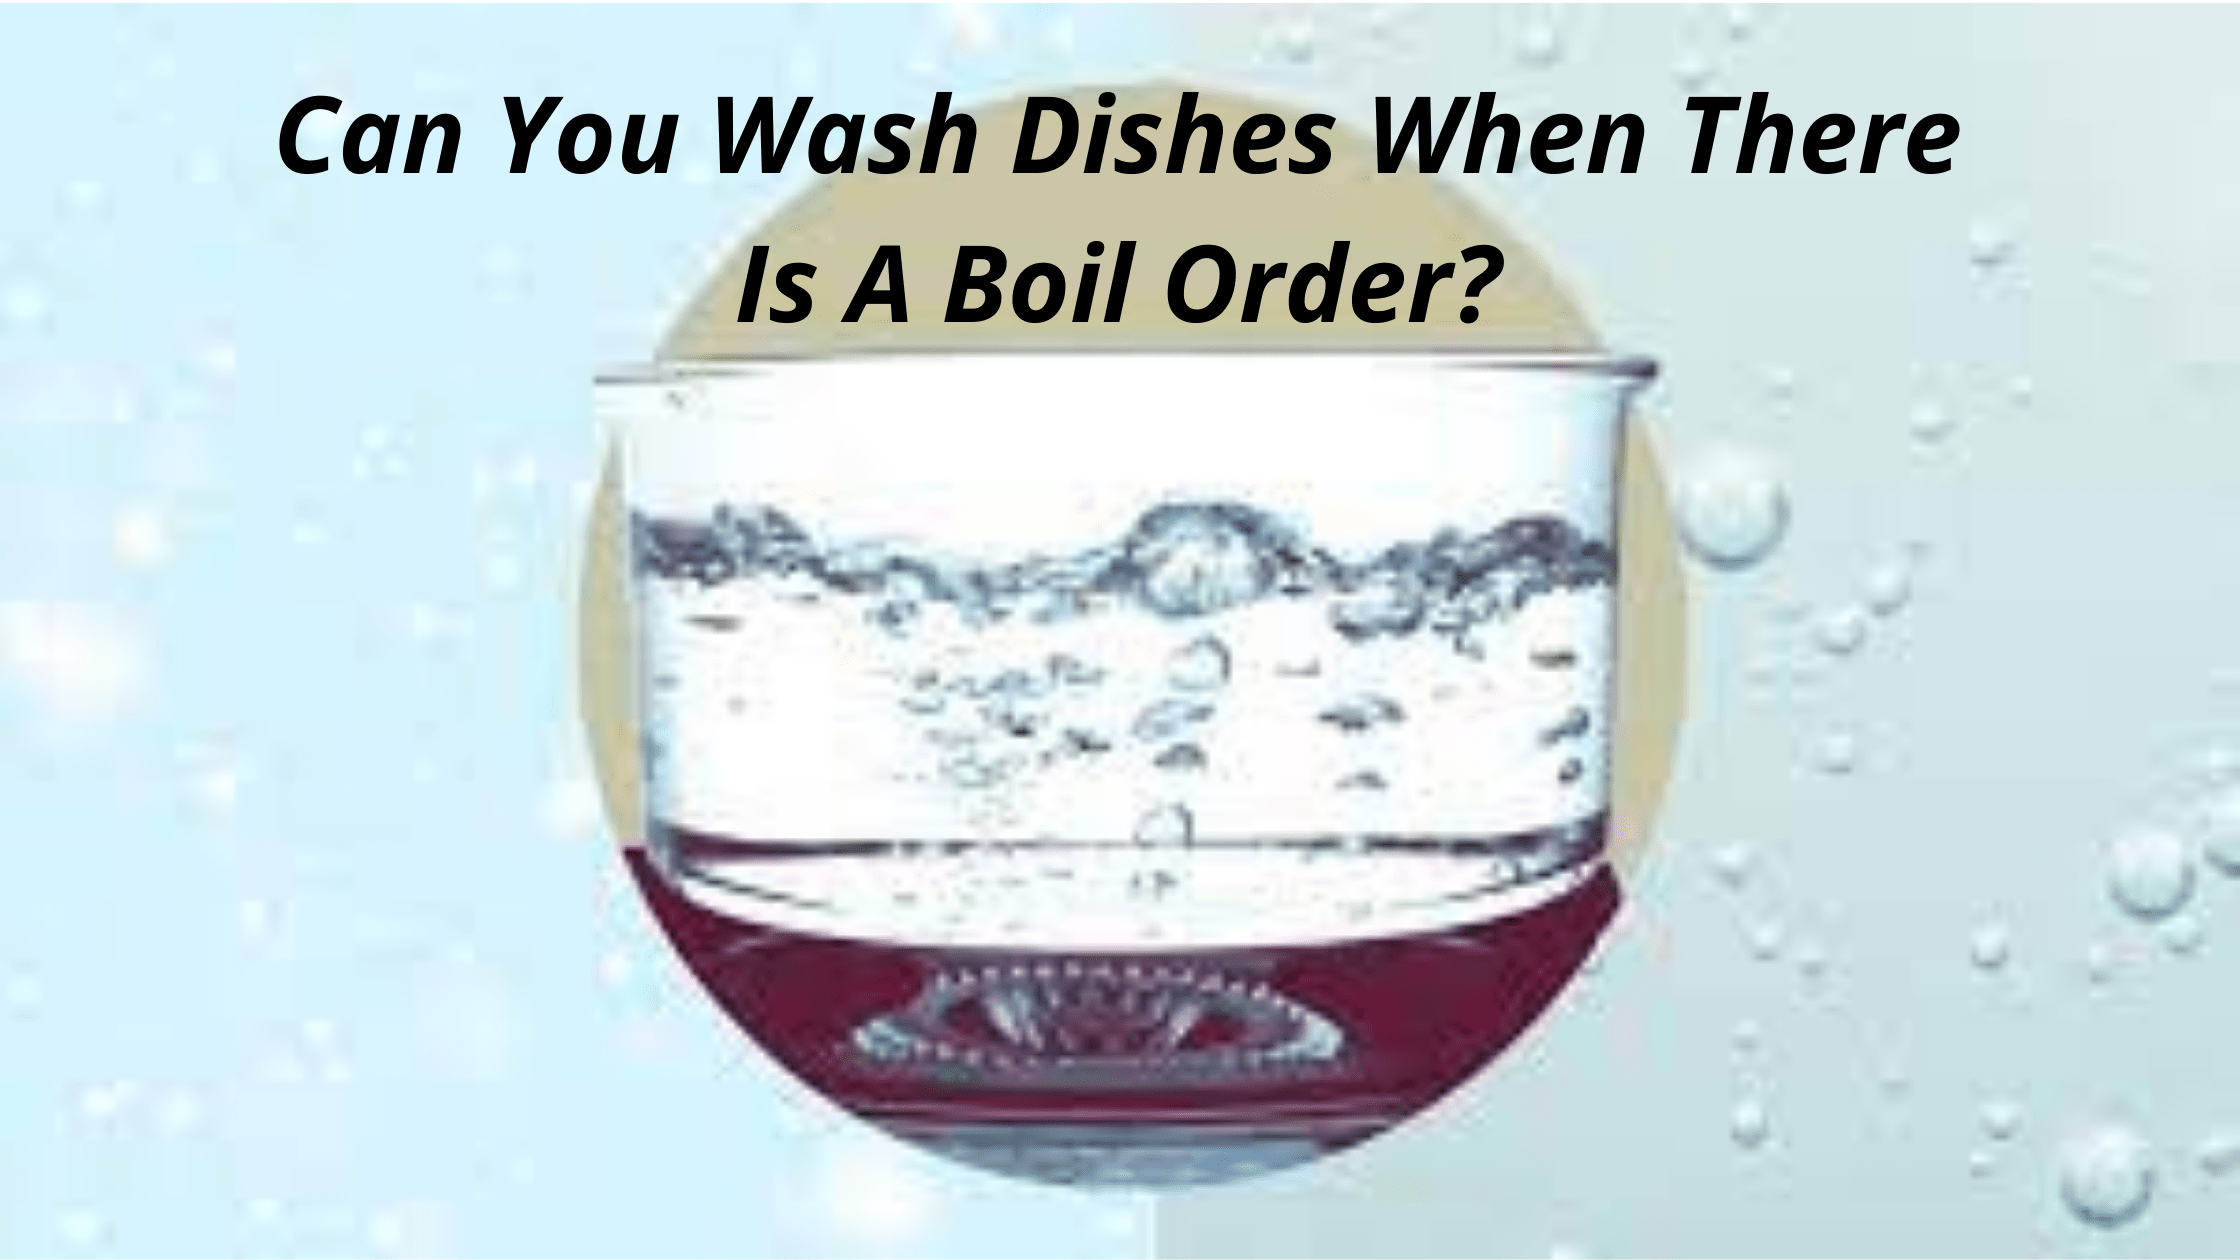 Can You Wash Dishes When There Is A Boil Order?